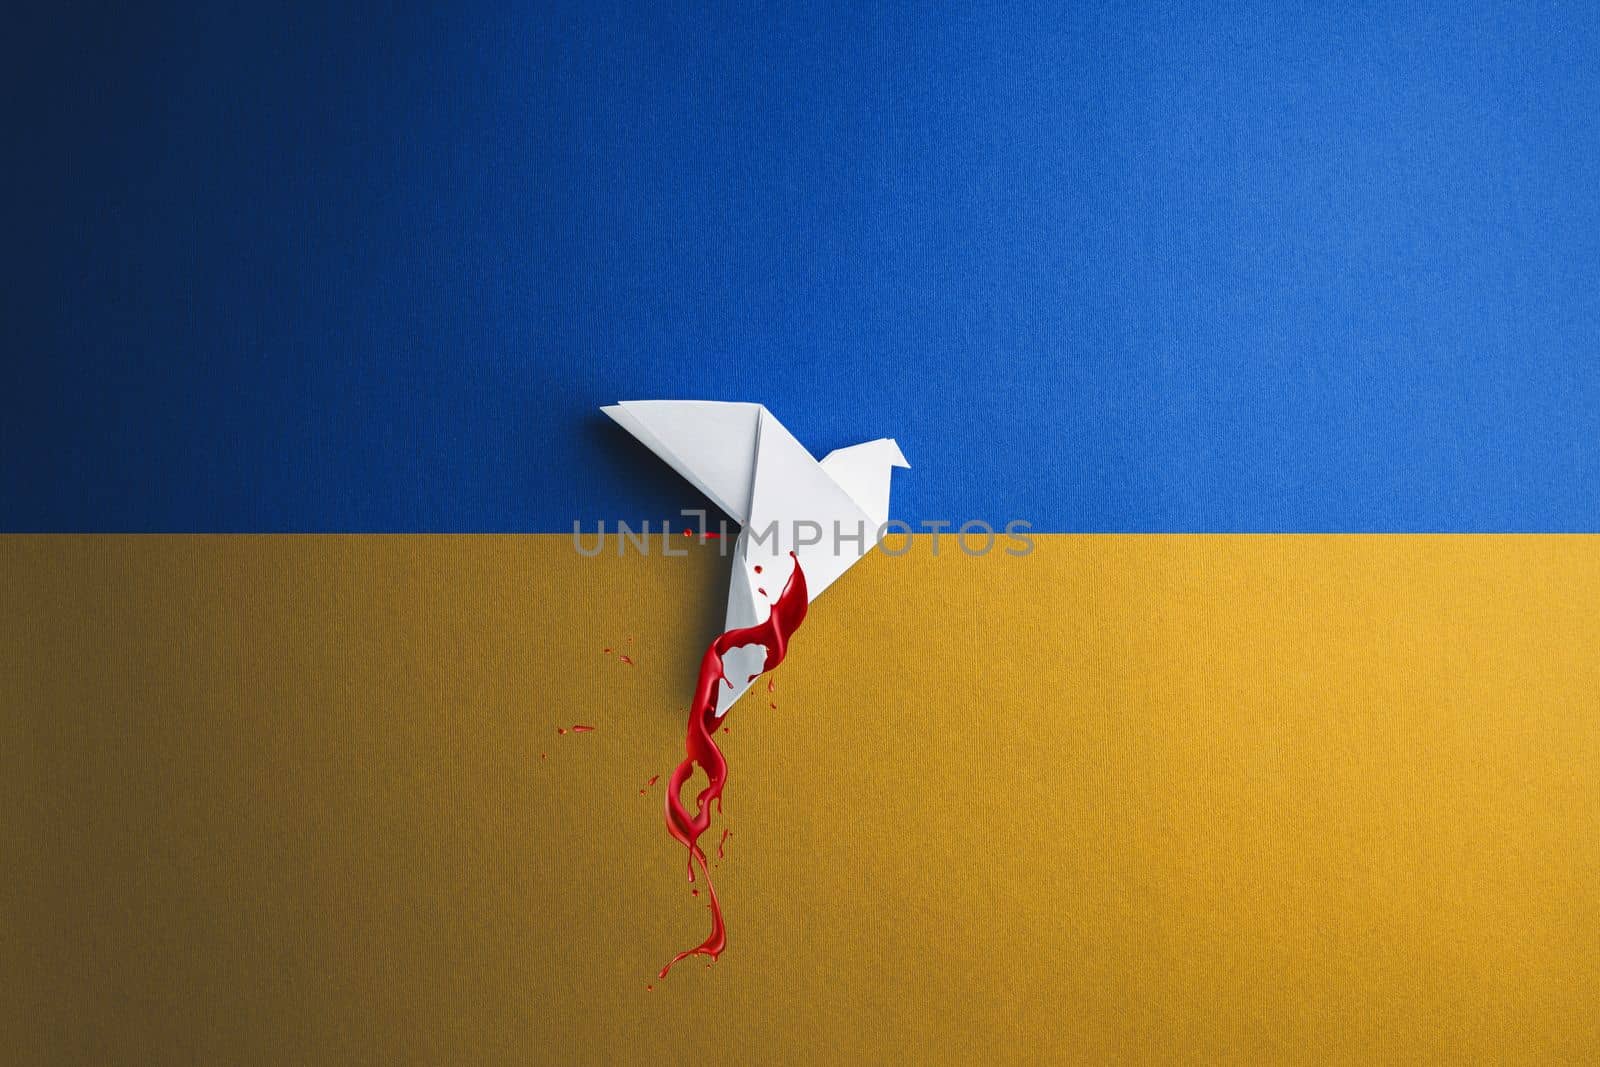 white paper origami dove bird in blood takes off and breaks free, on yellow blue background in color of ukraine flag. concept needs help and support, truth will win